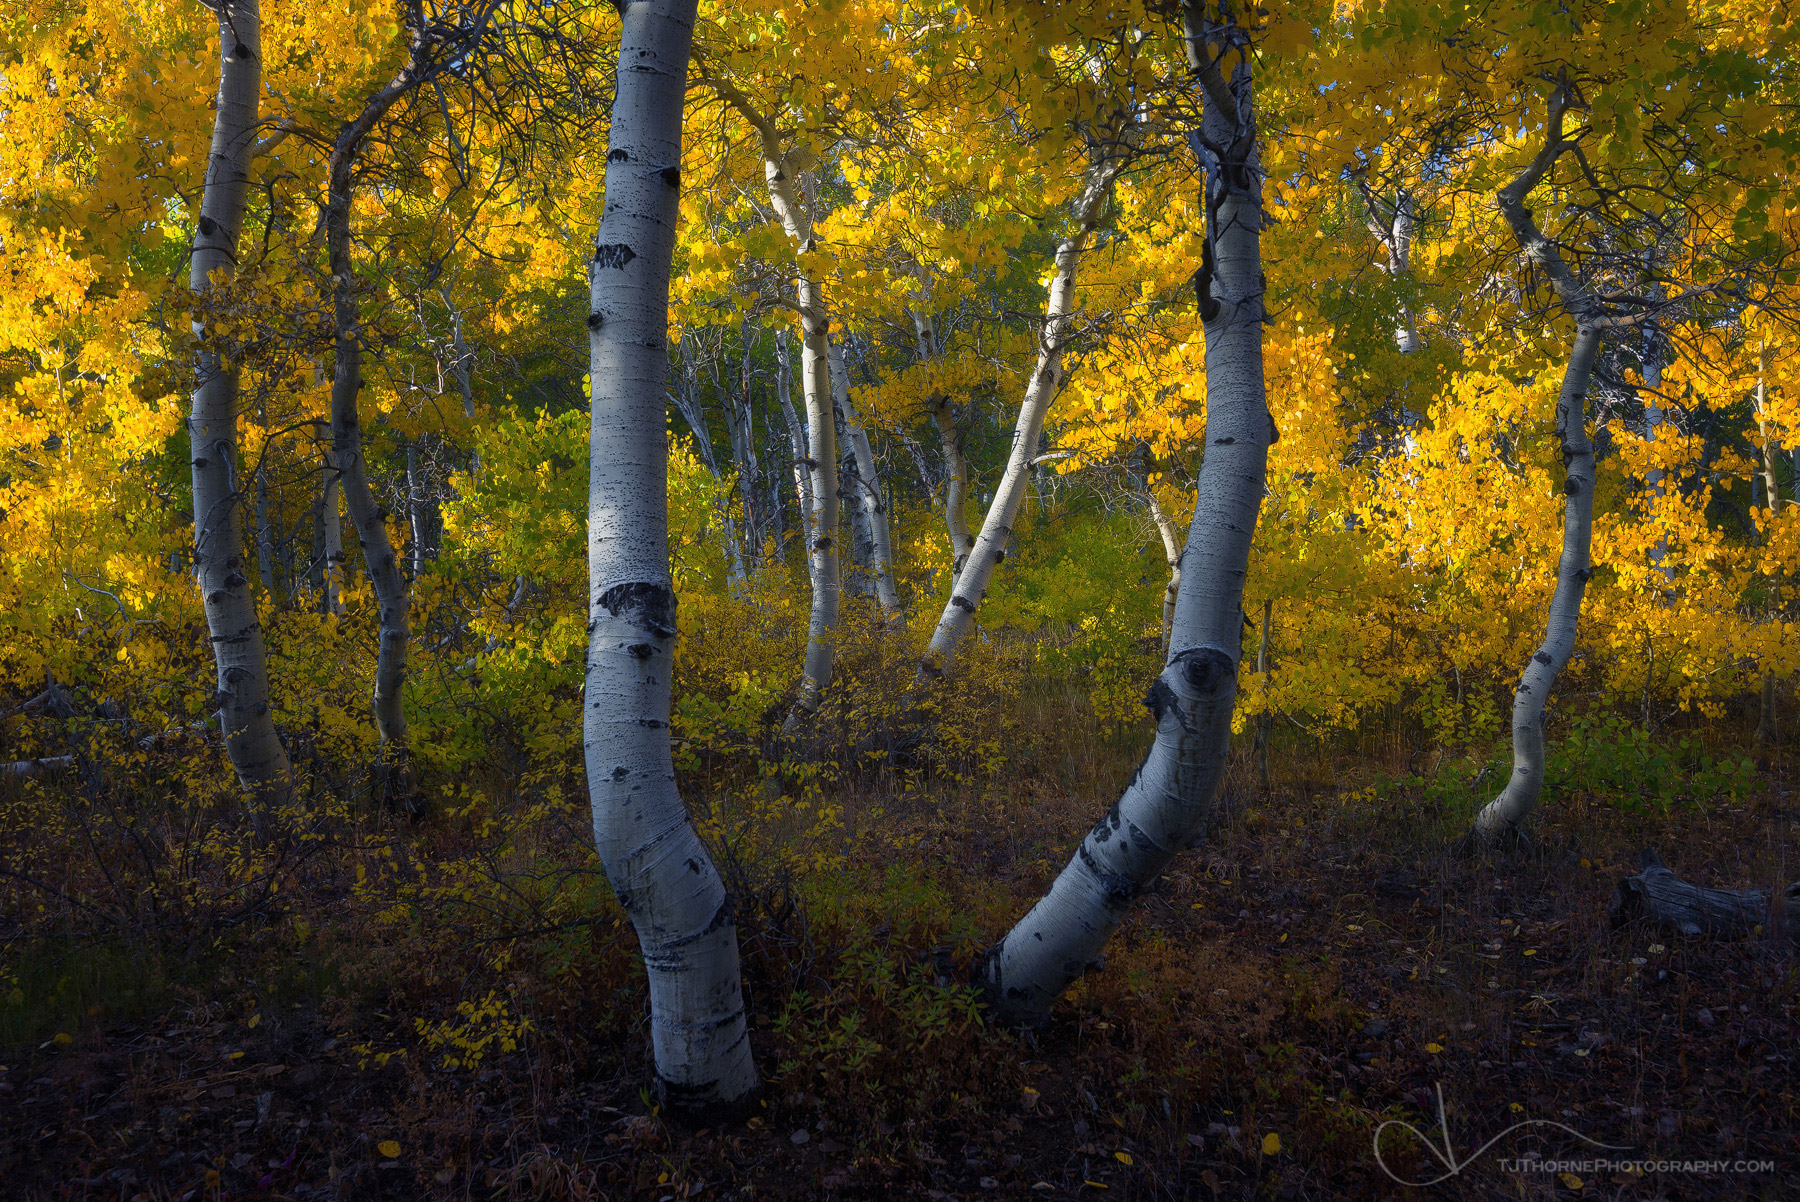 A grove of aspen trees in their autumn dress catch the early evening light in Steens Mountain Wilderness, Oregon. In autumn...